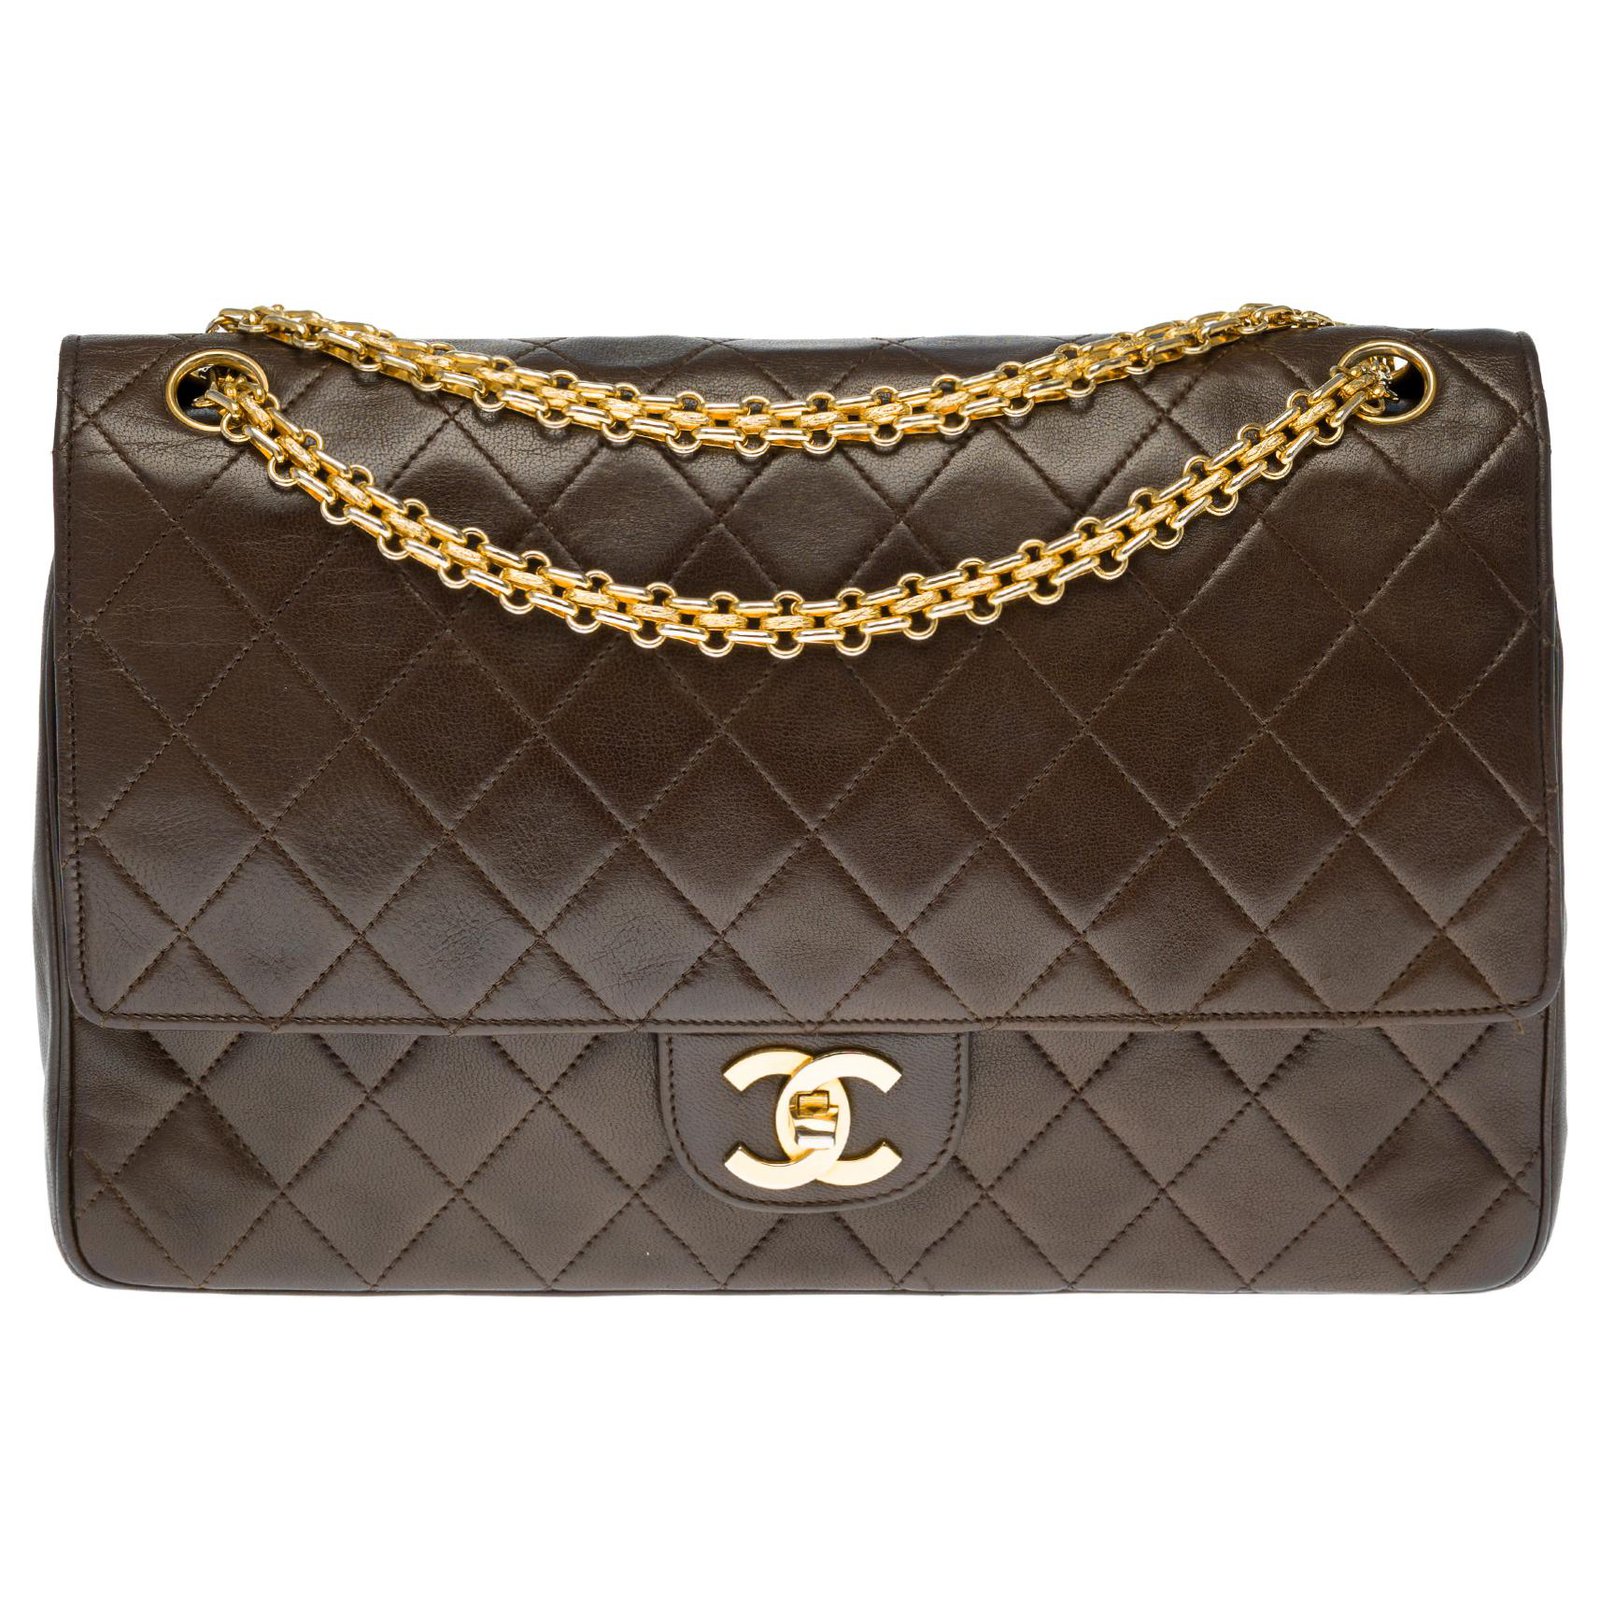 Timeless Splendid and Rare Classic two-tone Chanel bag in brown